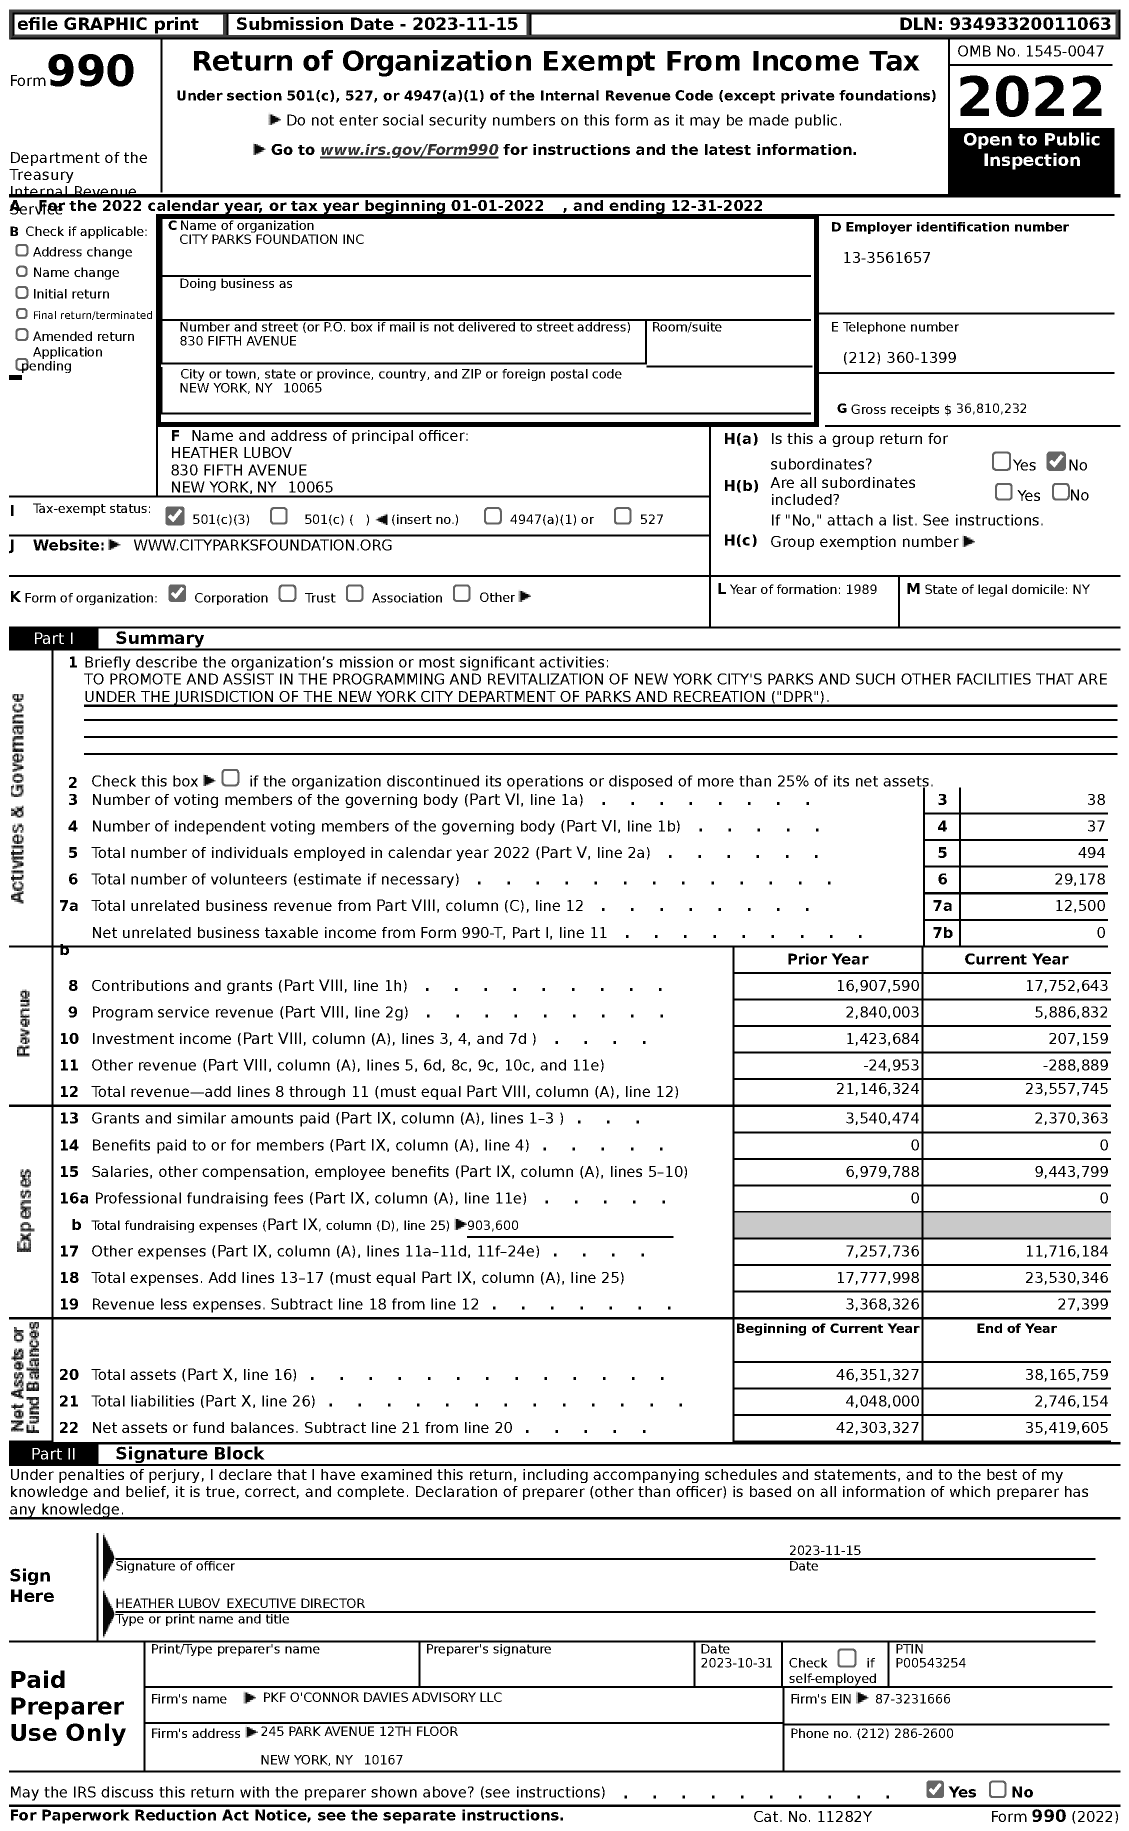 Image of first page of 2022 Form 990 for City Parks Foundation (CPF)